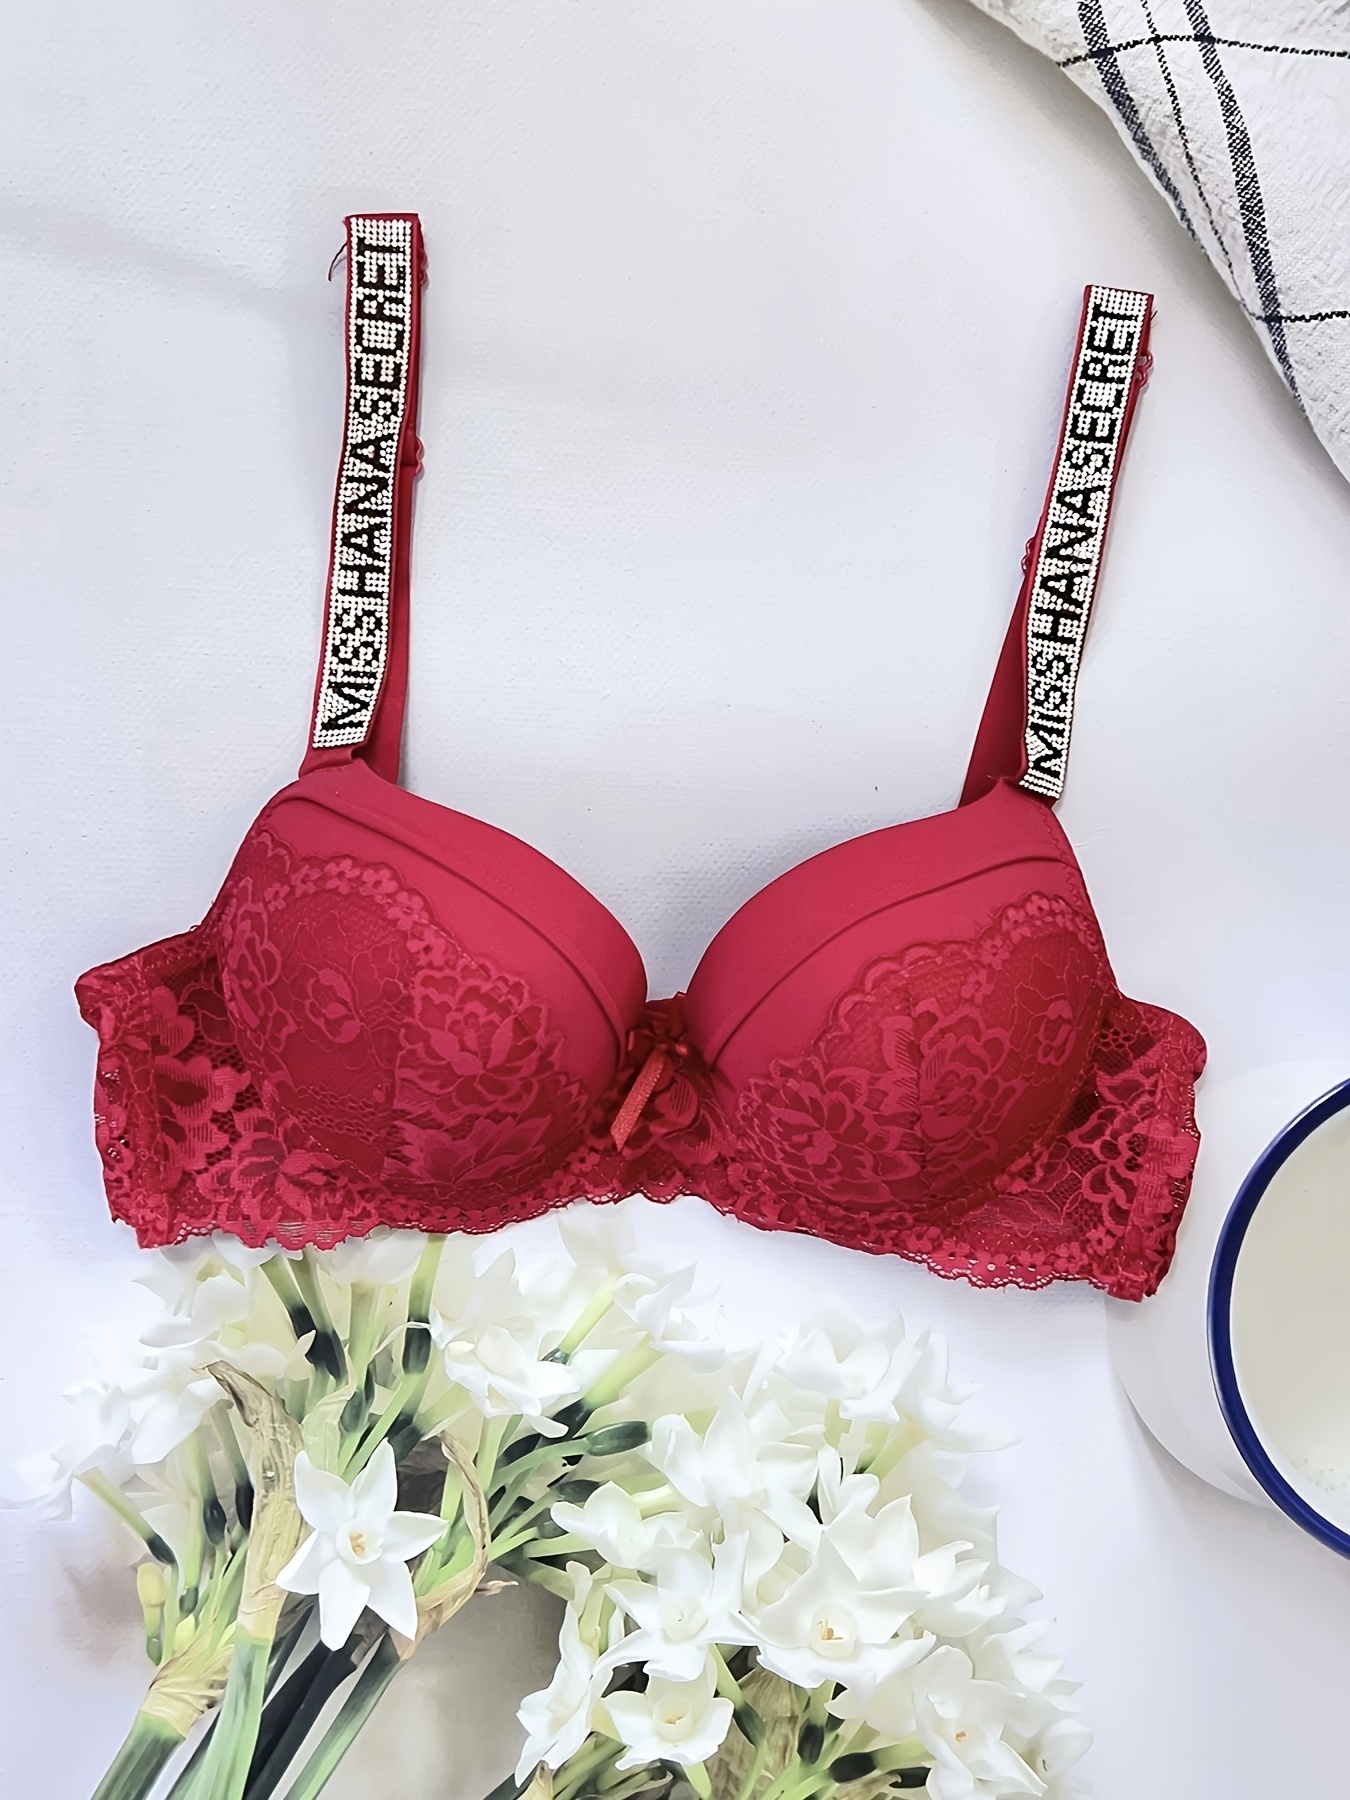 Simple Solid Floral Lace Bra, Comfy & Breathable Bow Knot Push Up Bra,  Women's Lingerie & Underwear